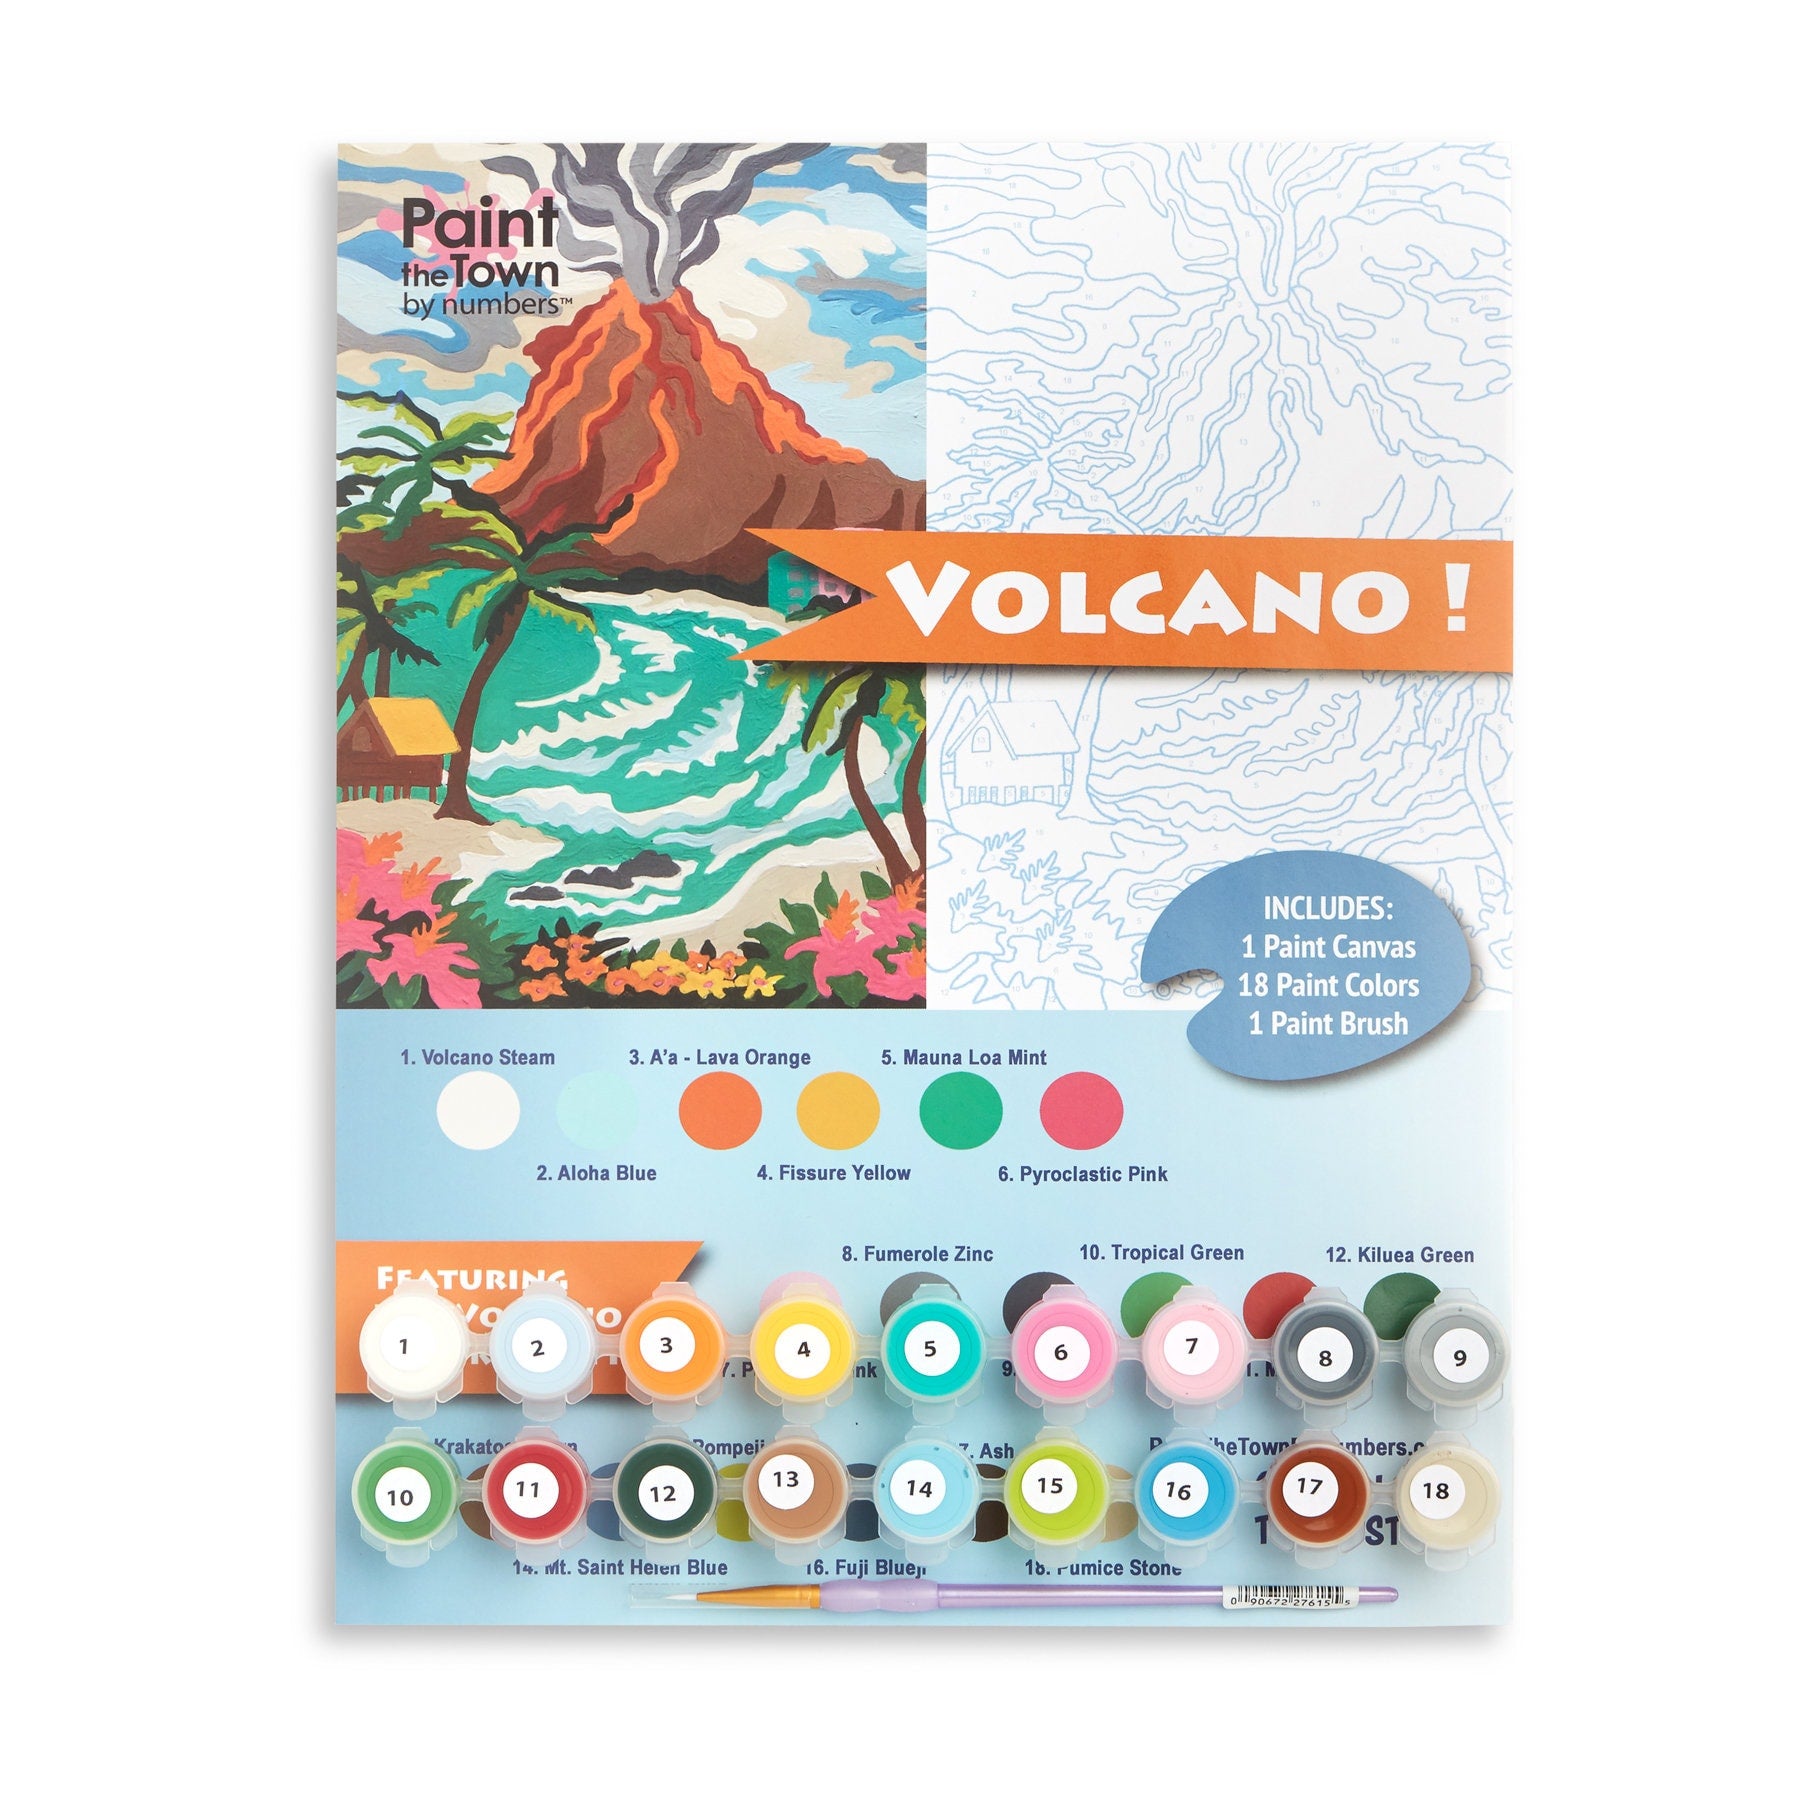 Volcano Paint by Number Kit; 11”x14” – Paint the Town by Numbers